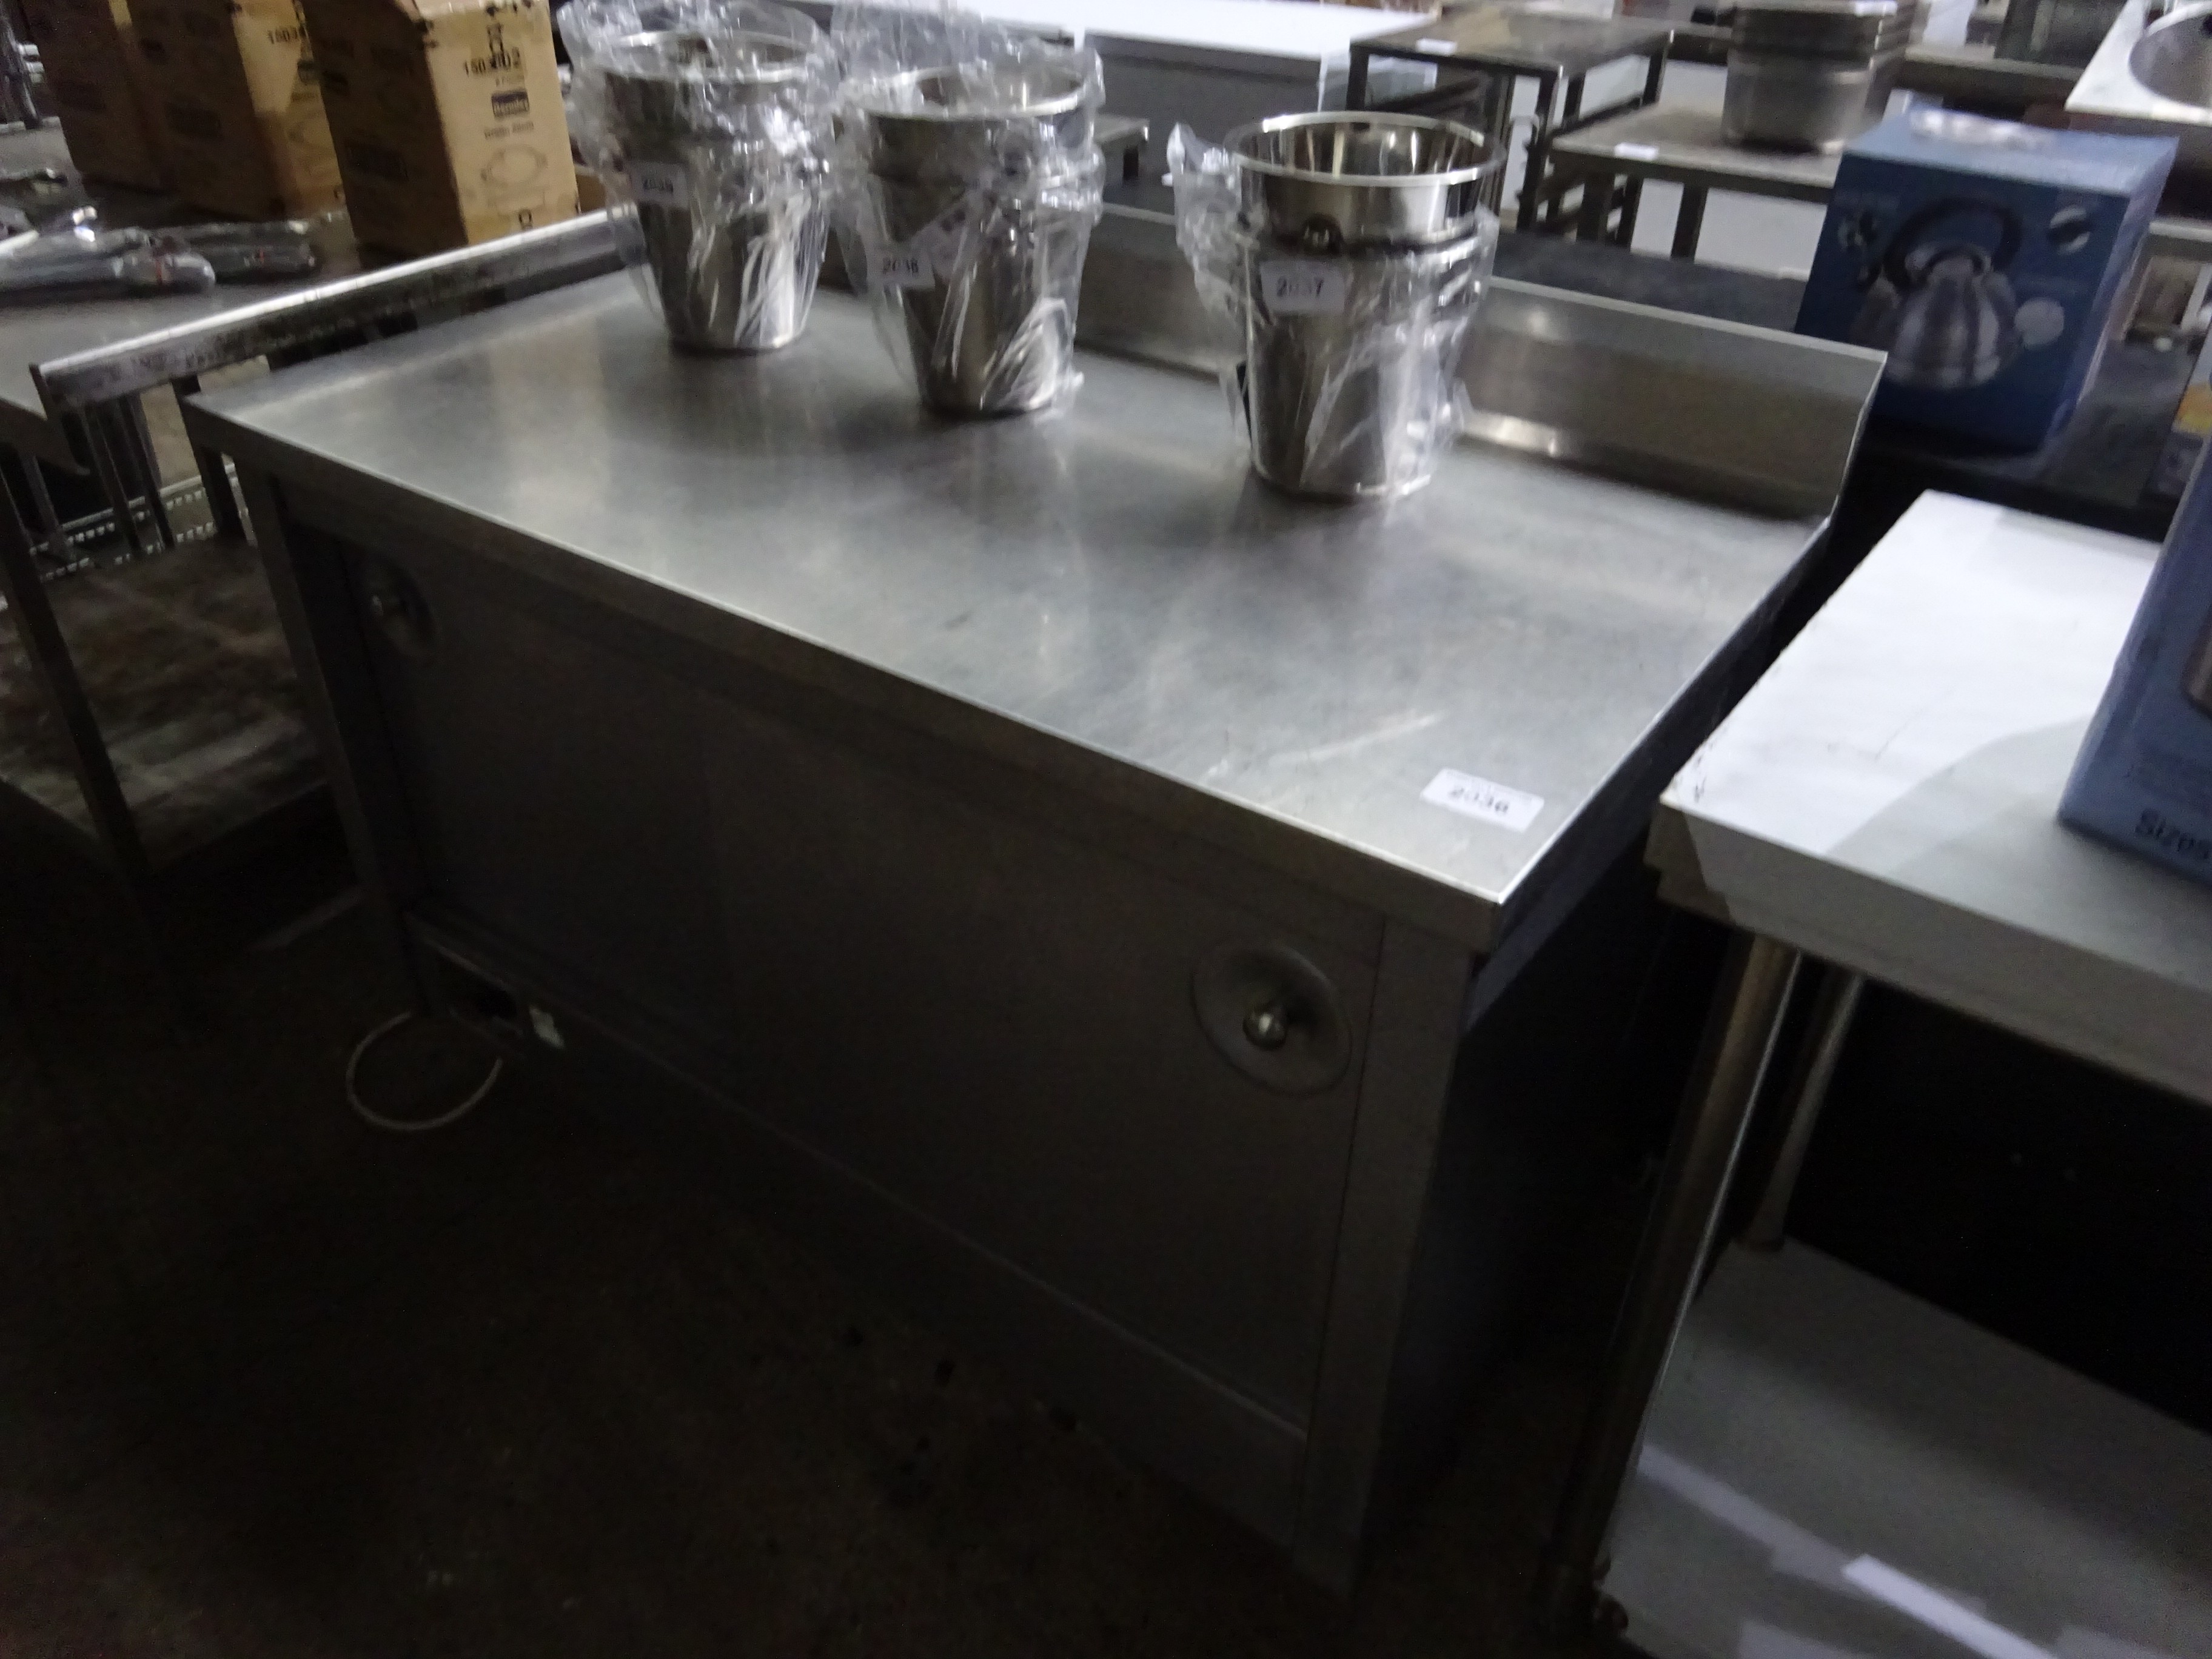 Mobile stainless steel hot cupboard, 240v, 130cms.